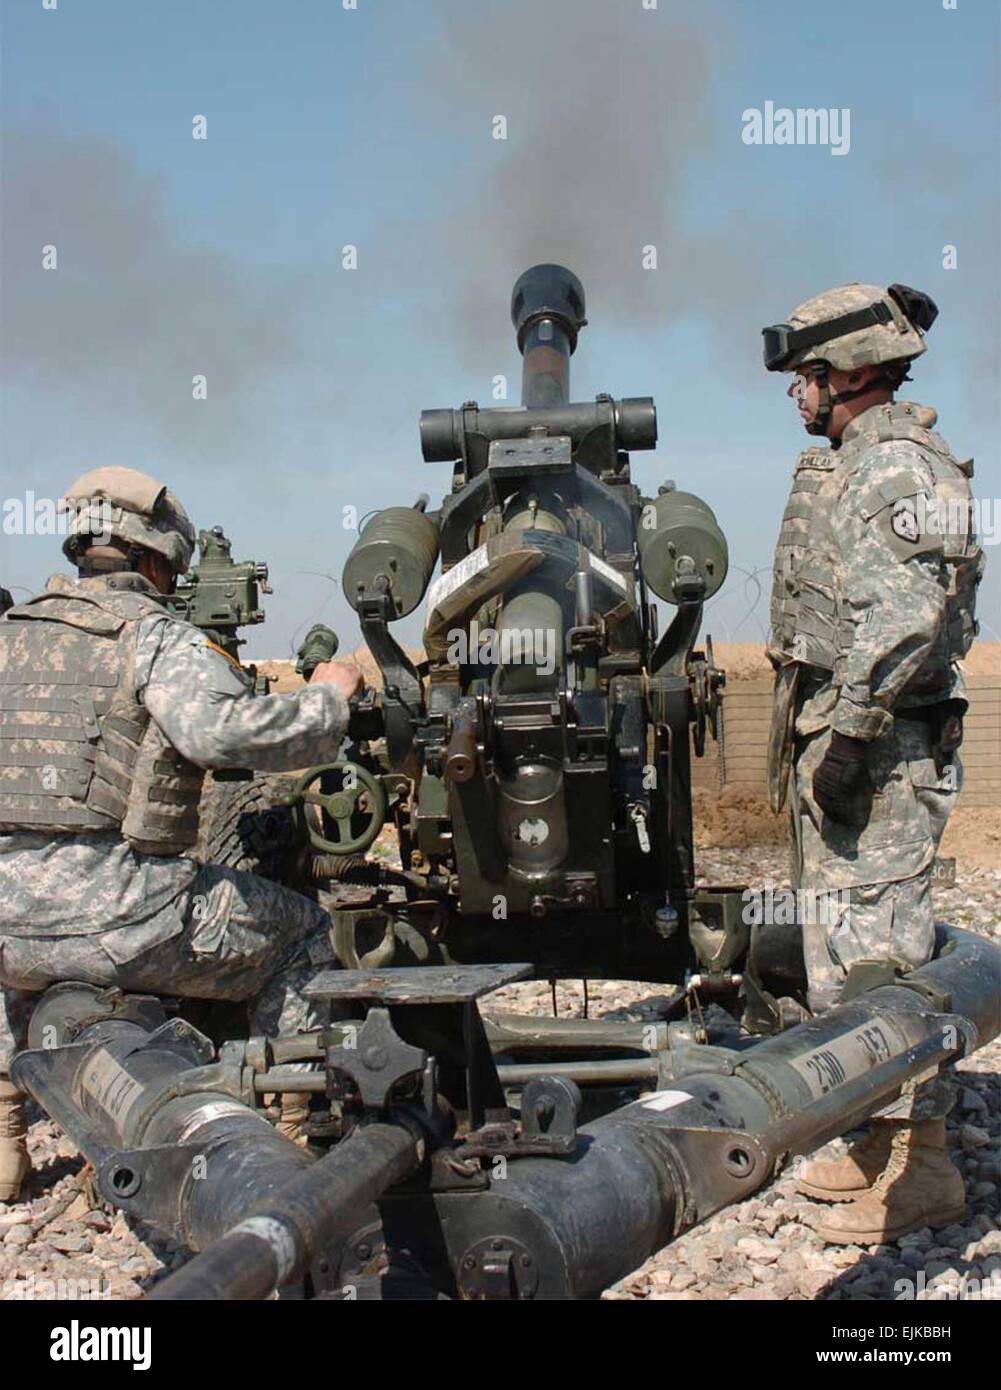 Spc. Christopher Flores left, a gunner, and Pfc. Chealse McMillian right, an assistant gunner, both with A Battery, 3rd Battalion, 7th Field Artillery Regiment, fire a Howitzer during a live-fire exercise at Forward Operating Base McHenry. Stock Photo